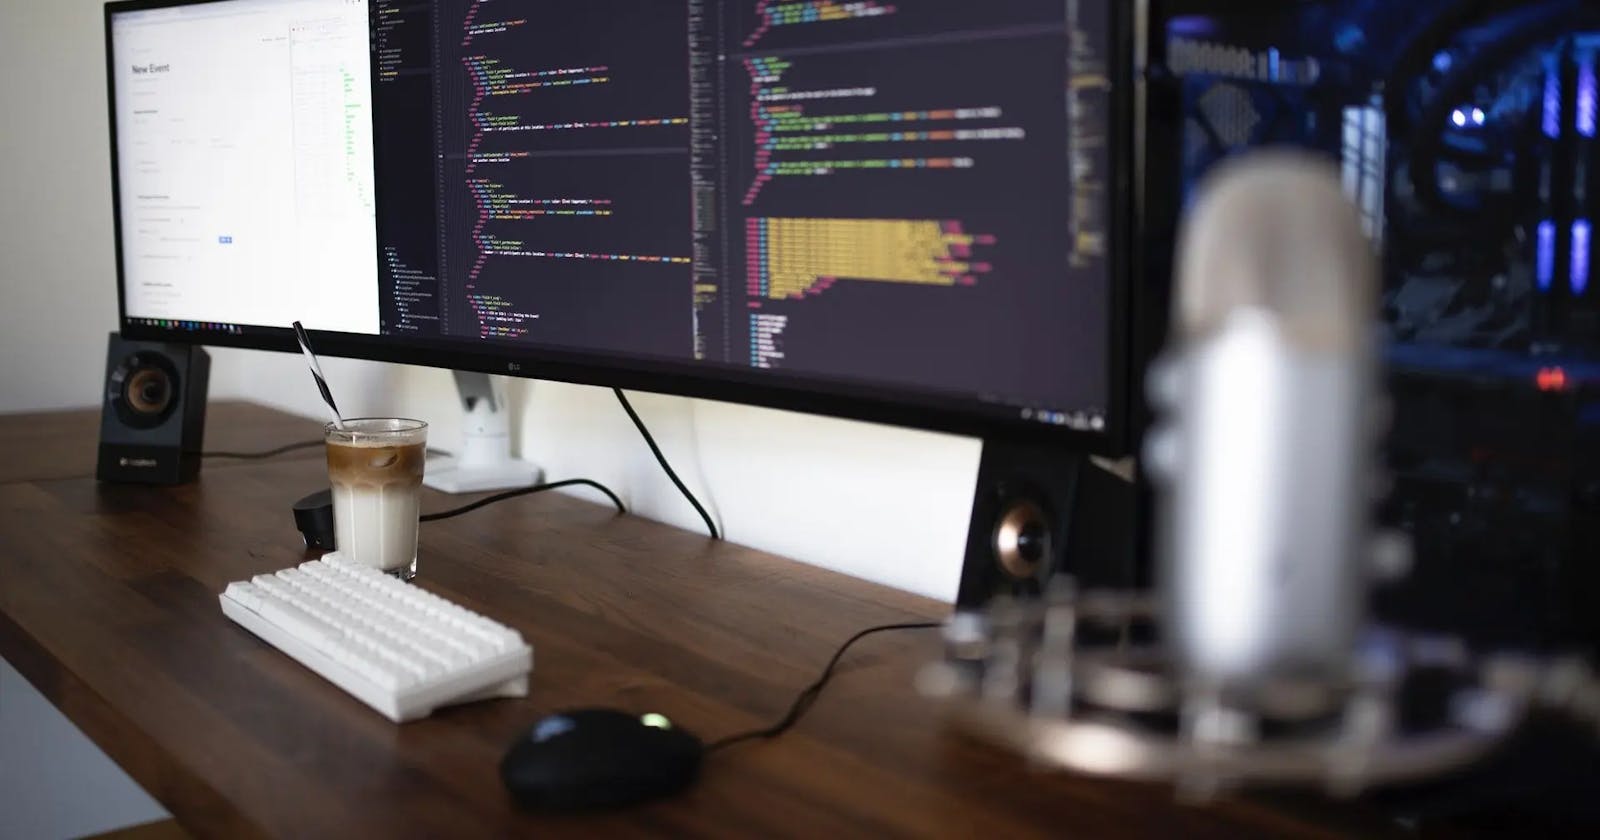 11 Stages To Become A JavaScript Full-Stack Engineer